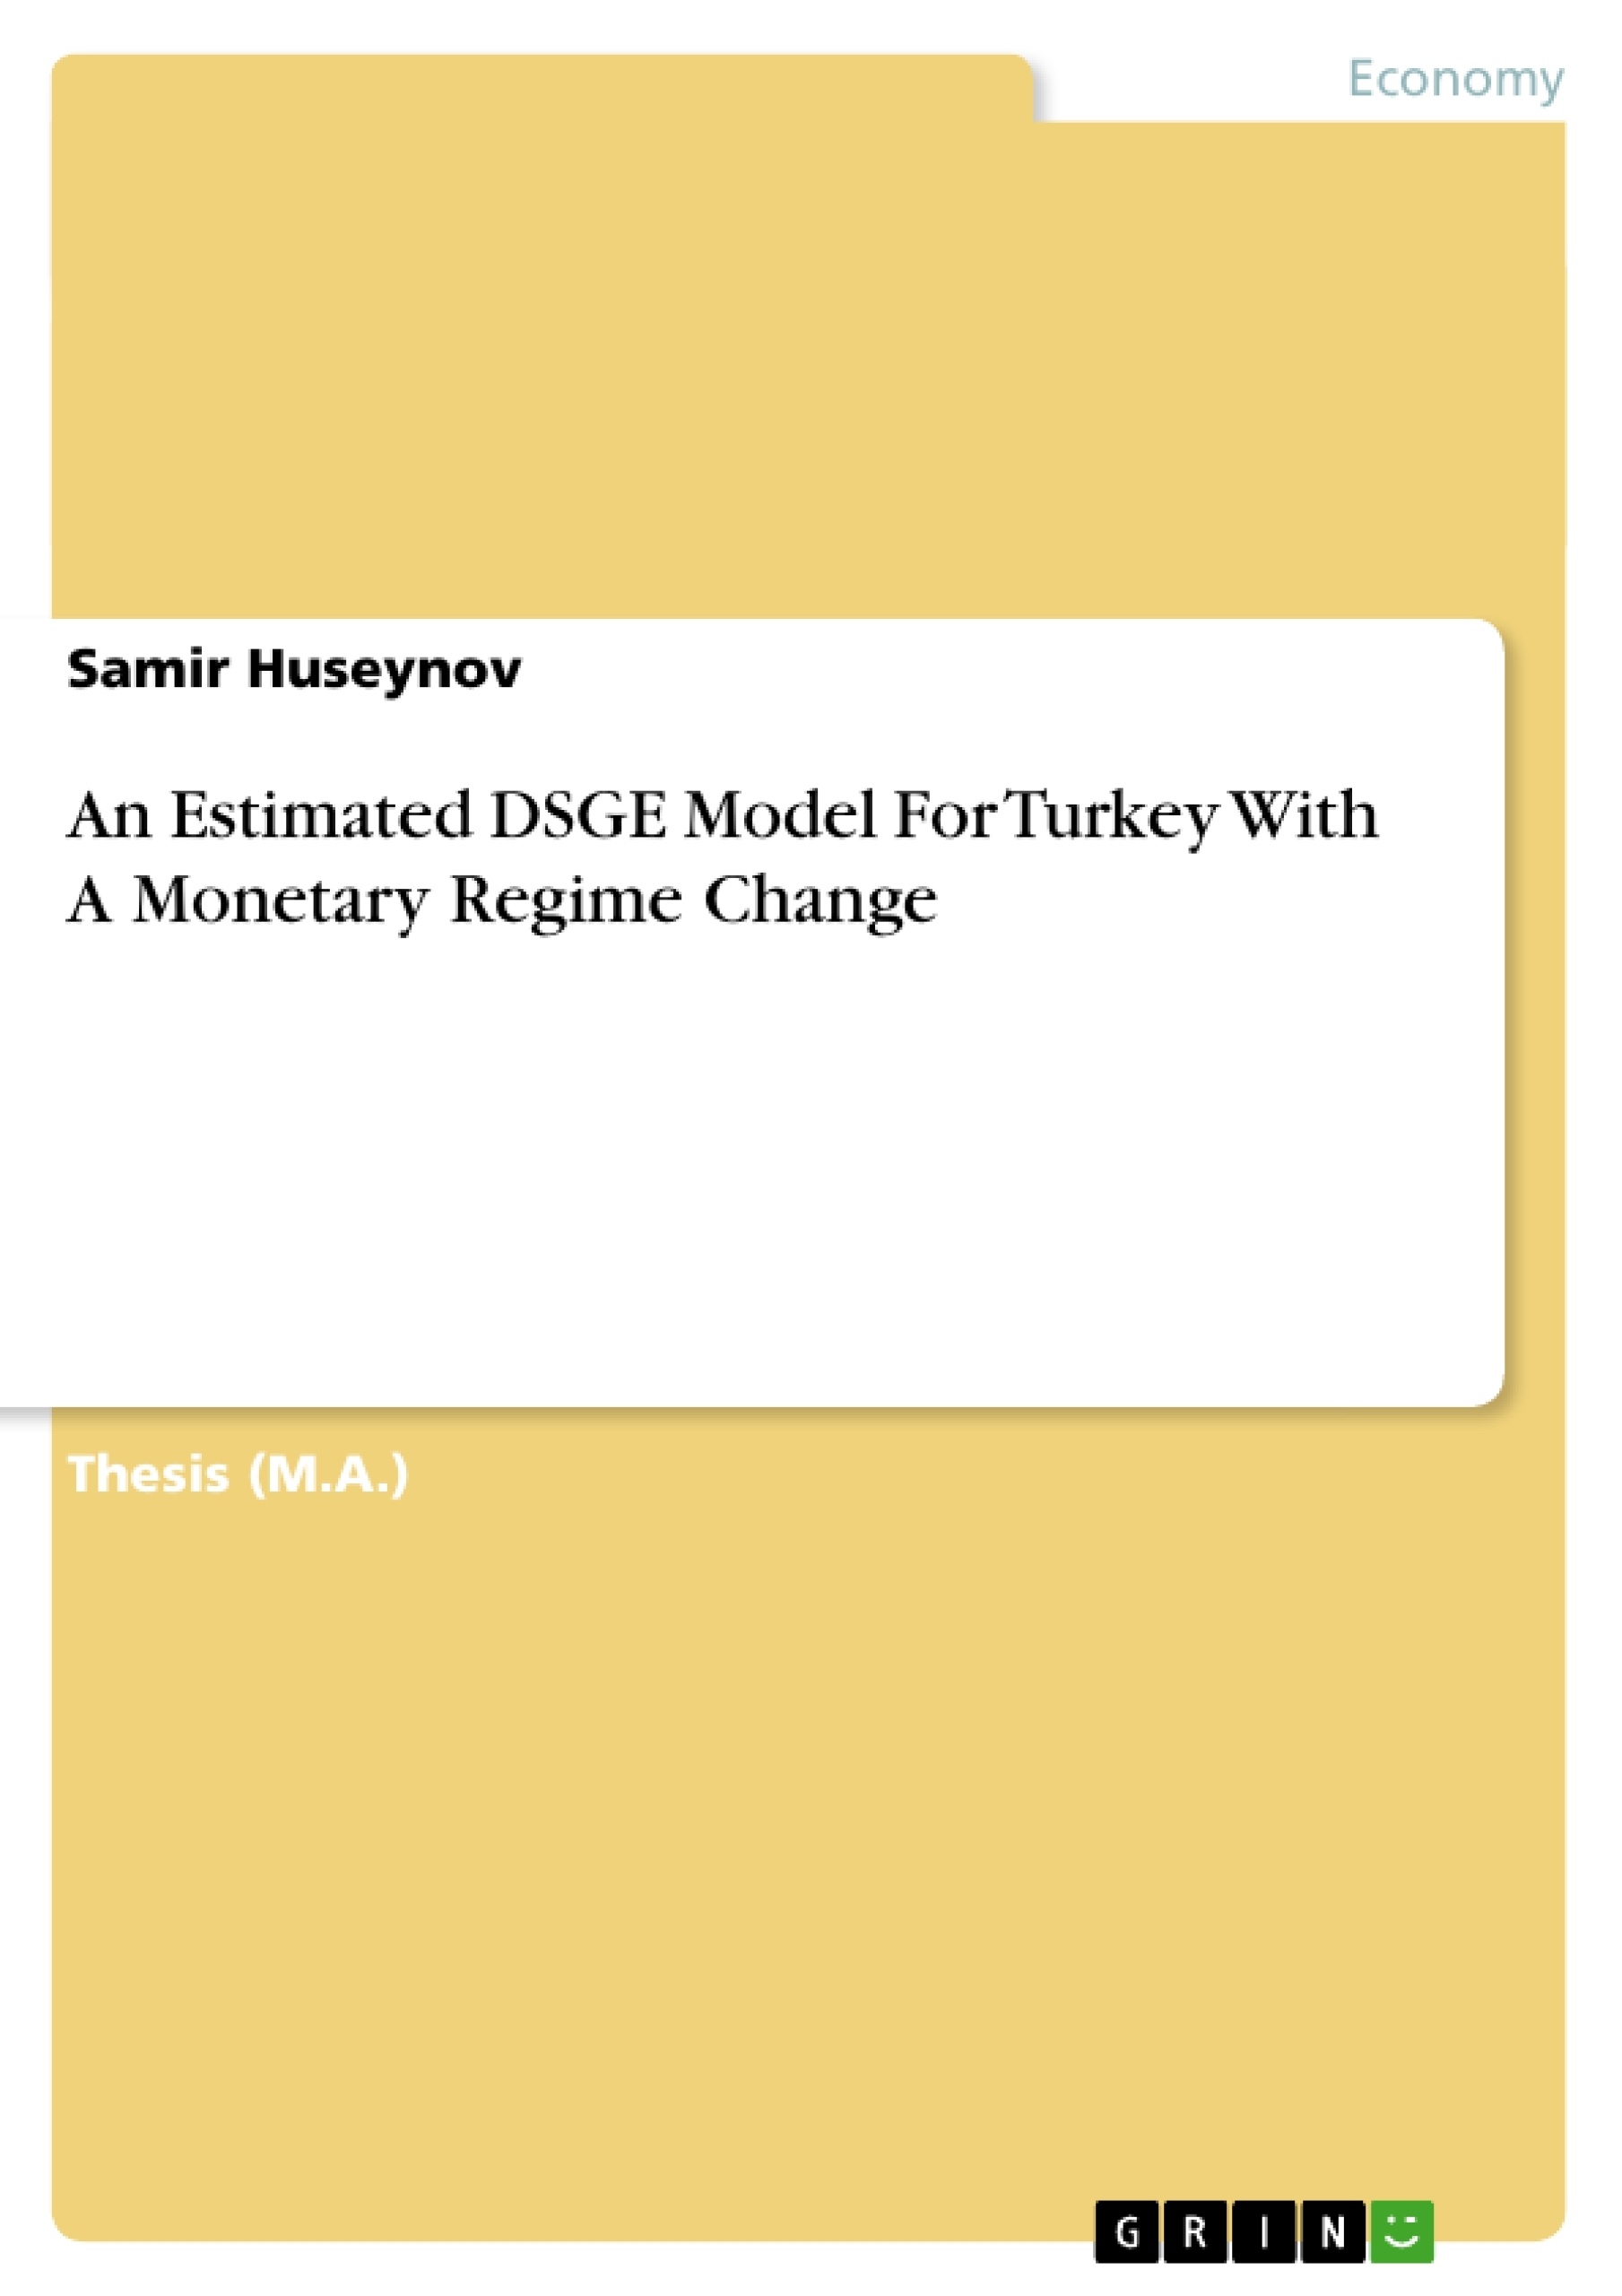 Título: An Estimated DSGE Model For Turkey With A Monetary Regime Change